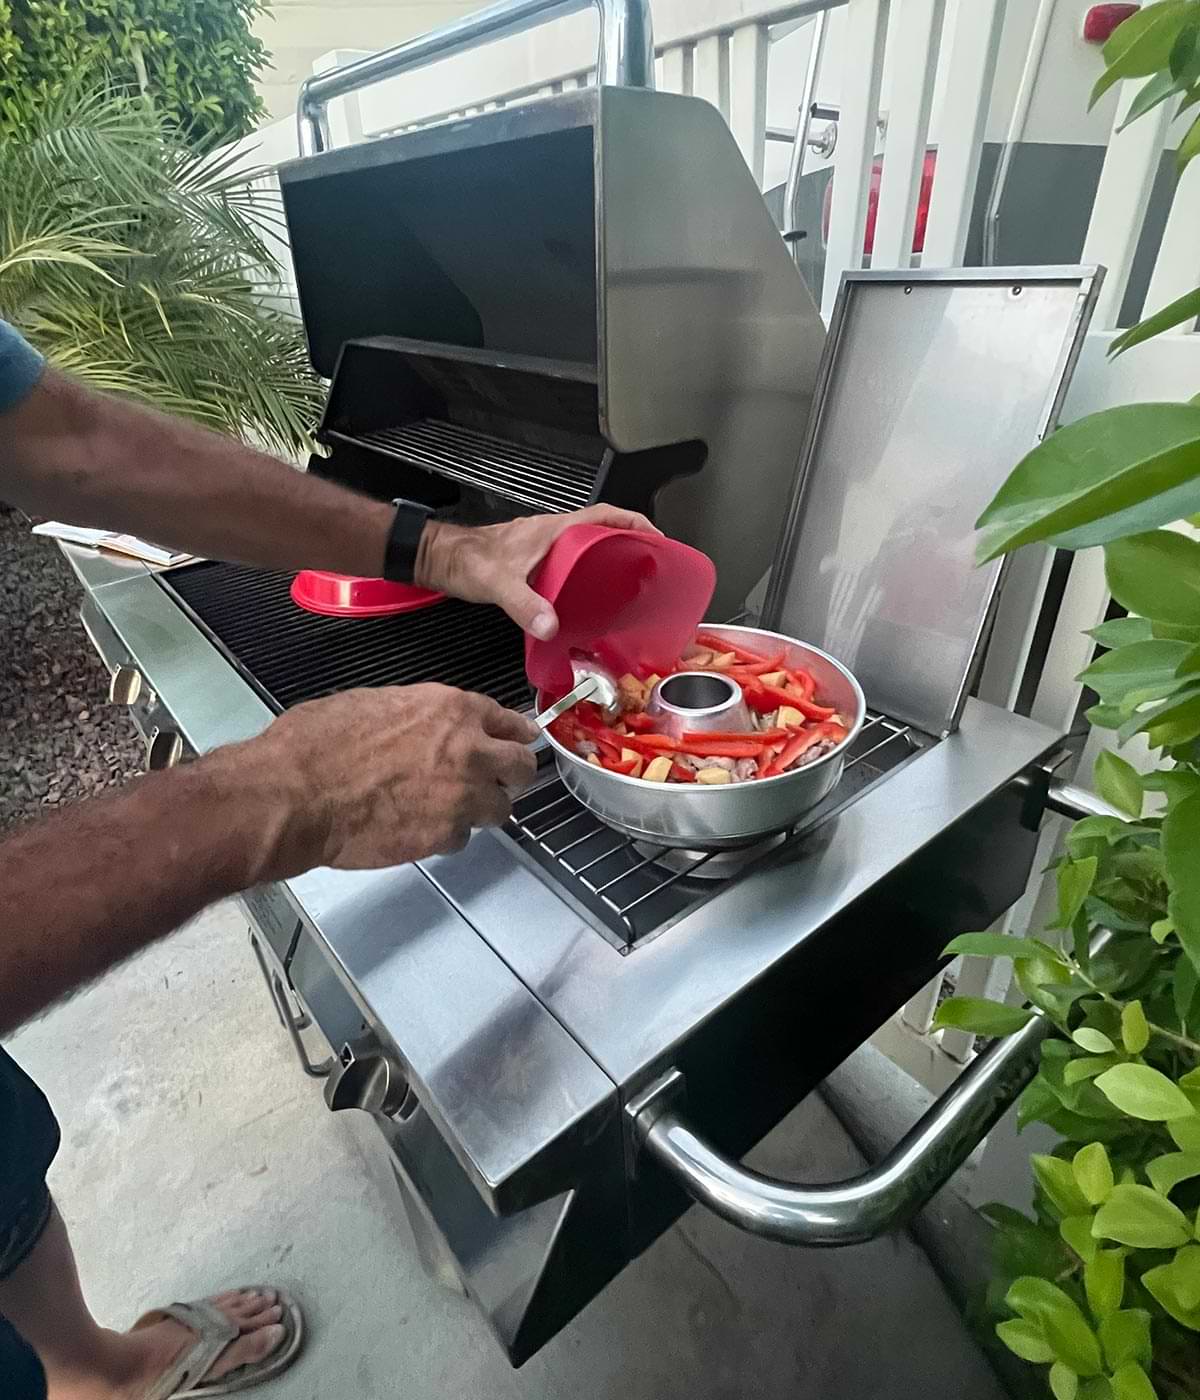 hands pour food ingredients into the molded Omnia pan that sits on a side grate of a large grill